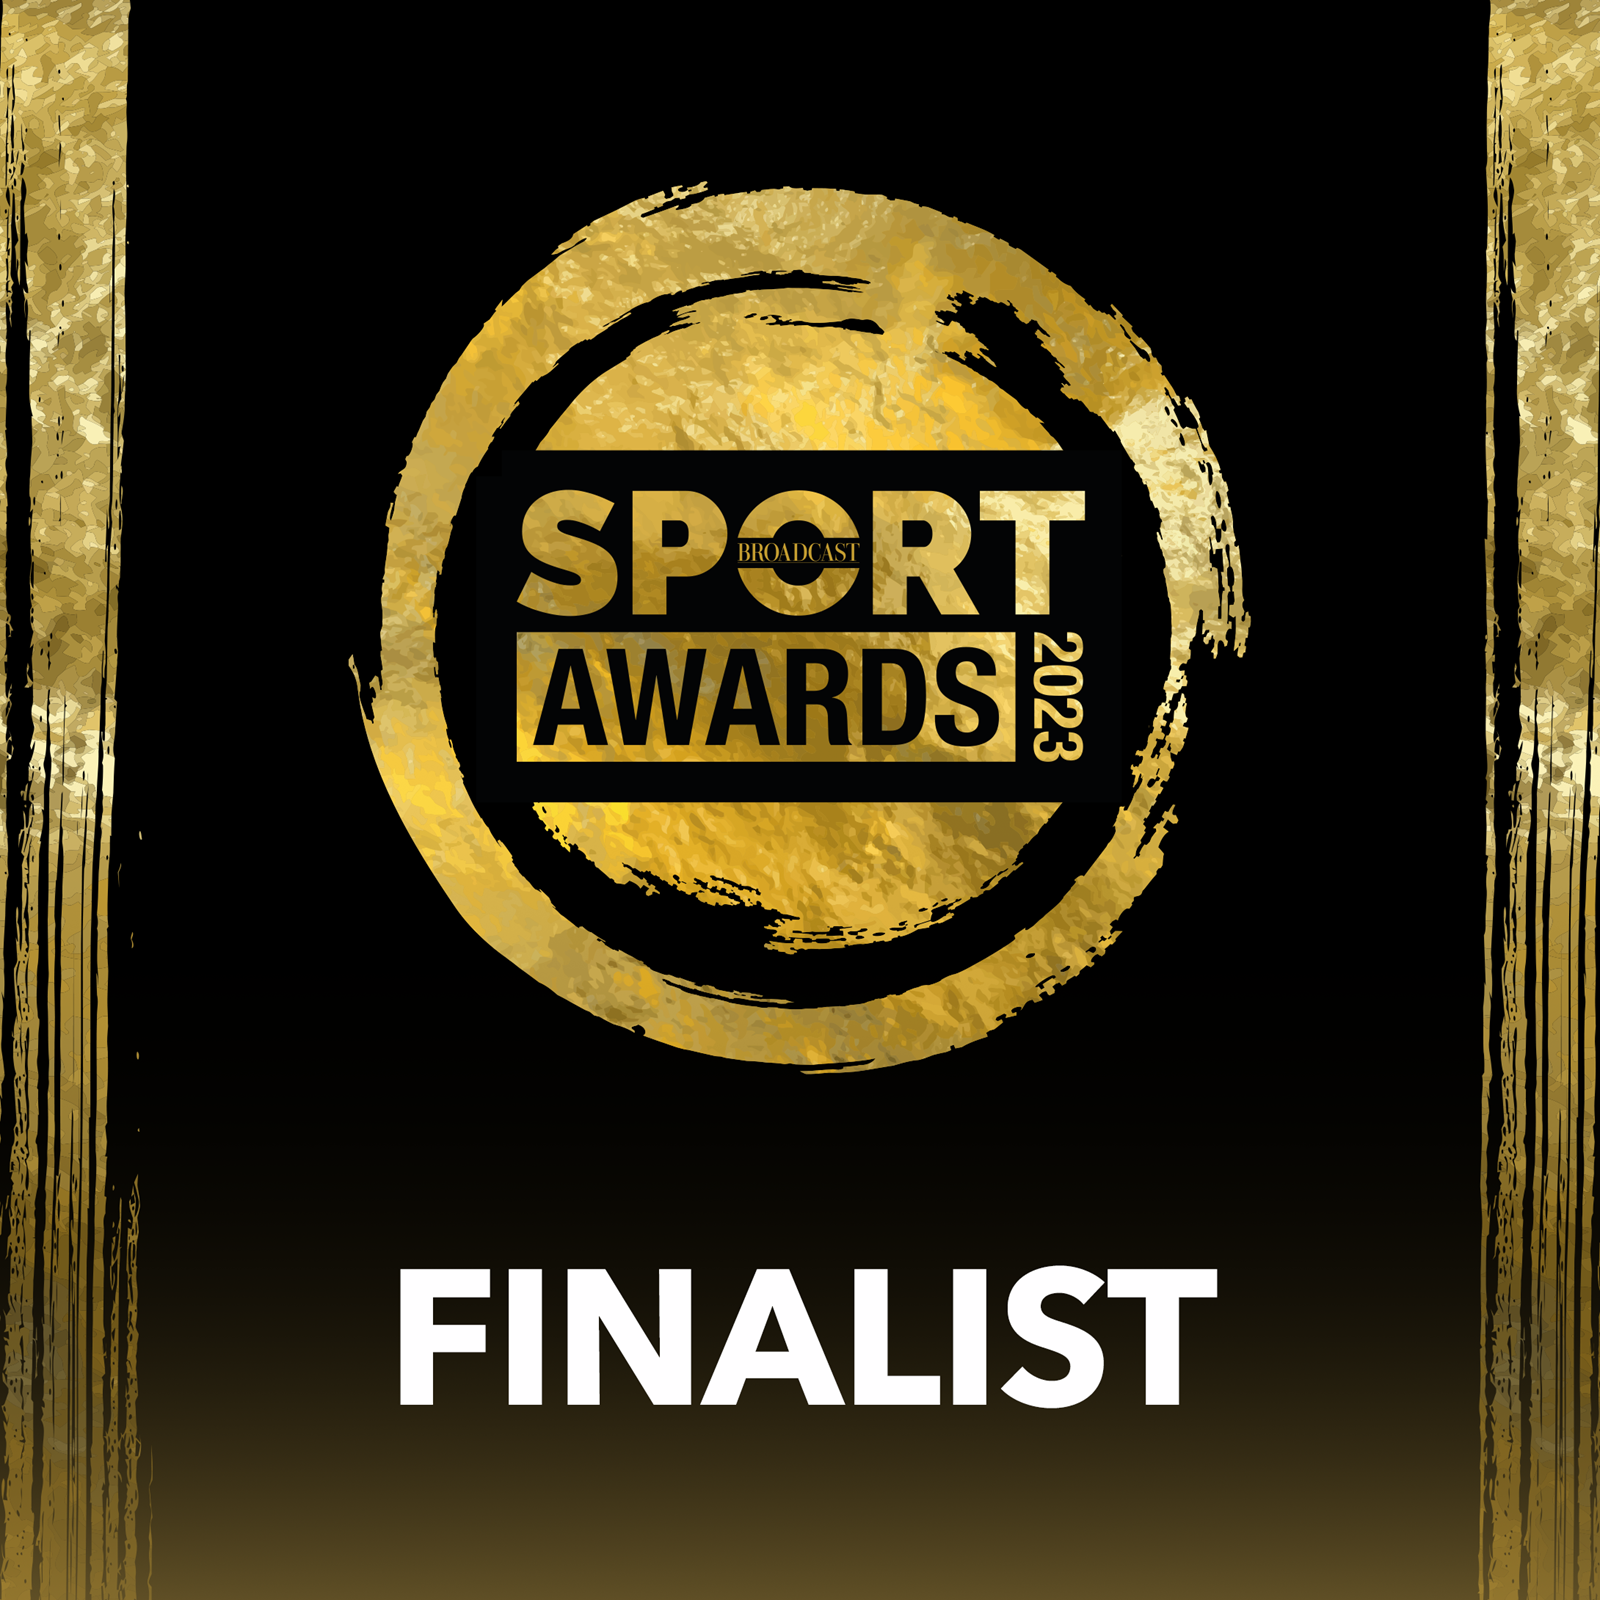 Sunset+Vine on track for gold at this years Broadcast Sport Awards!